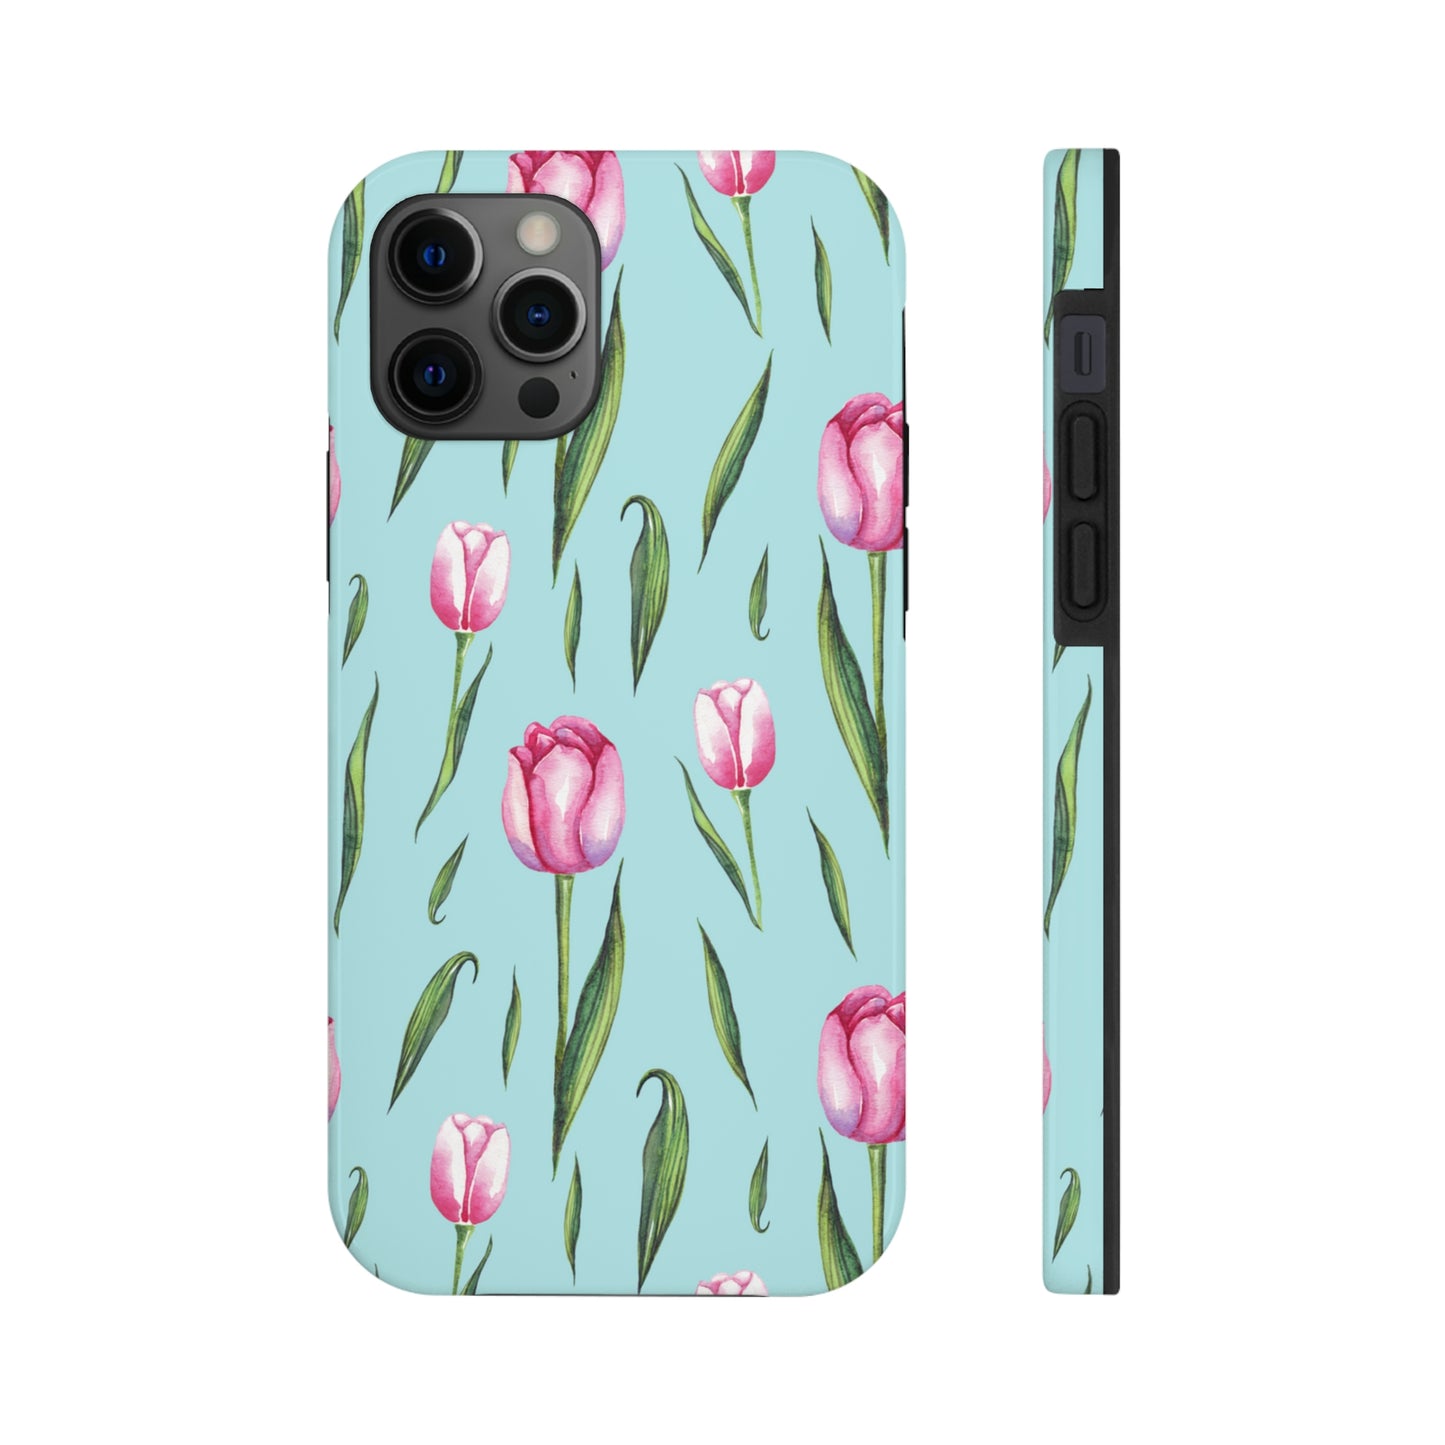 teal iphone or samsung phone case with pink tulip print for summer or spring fashion